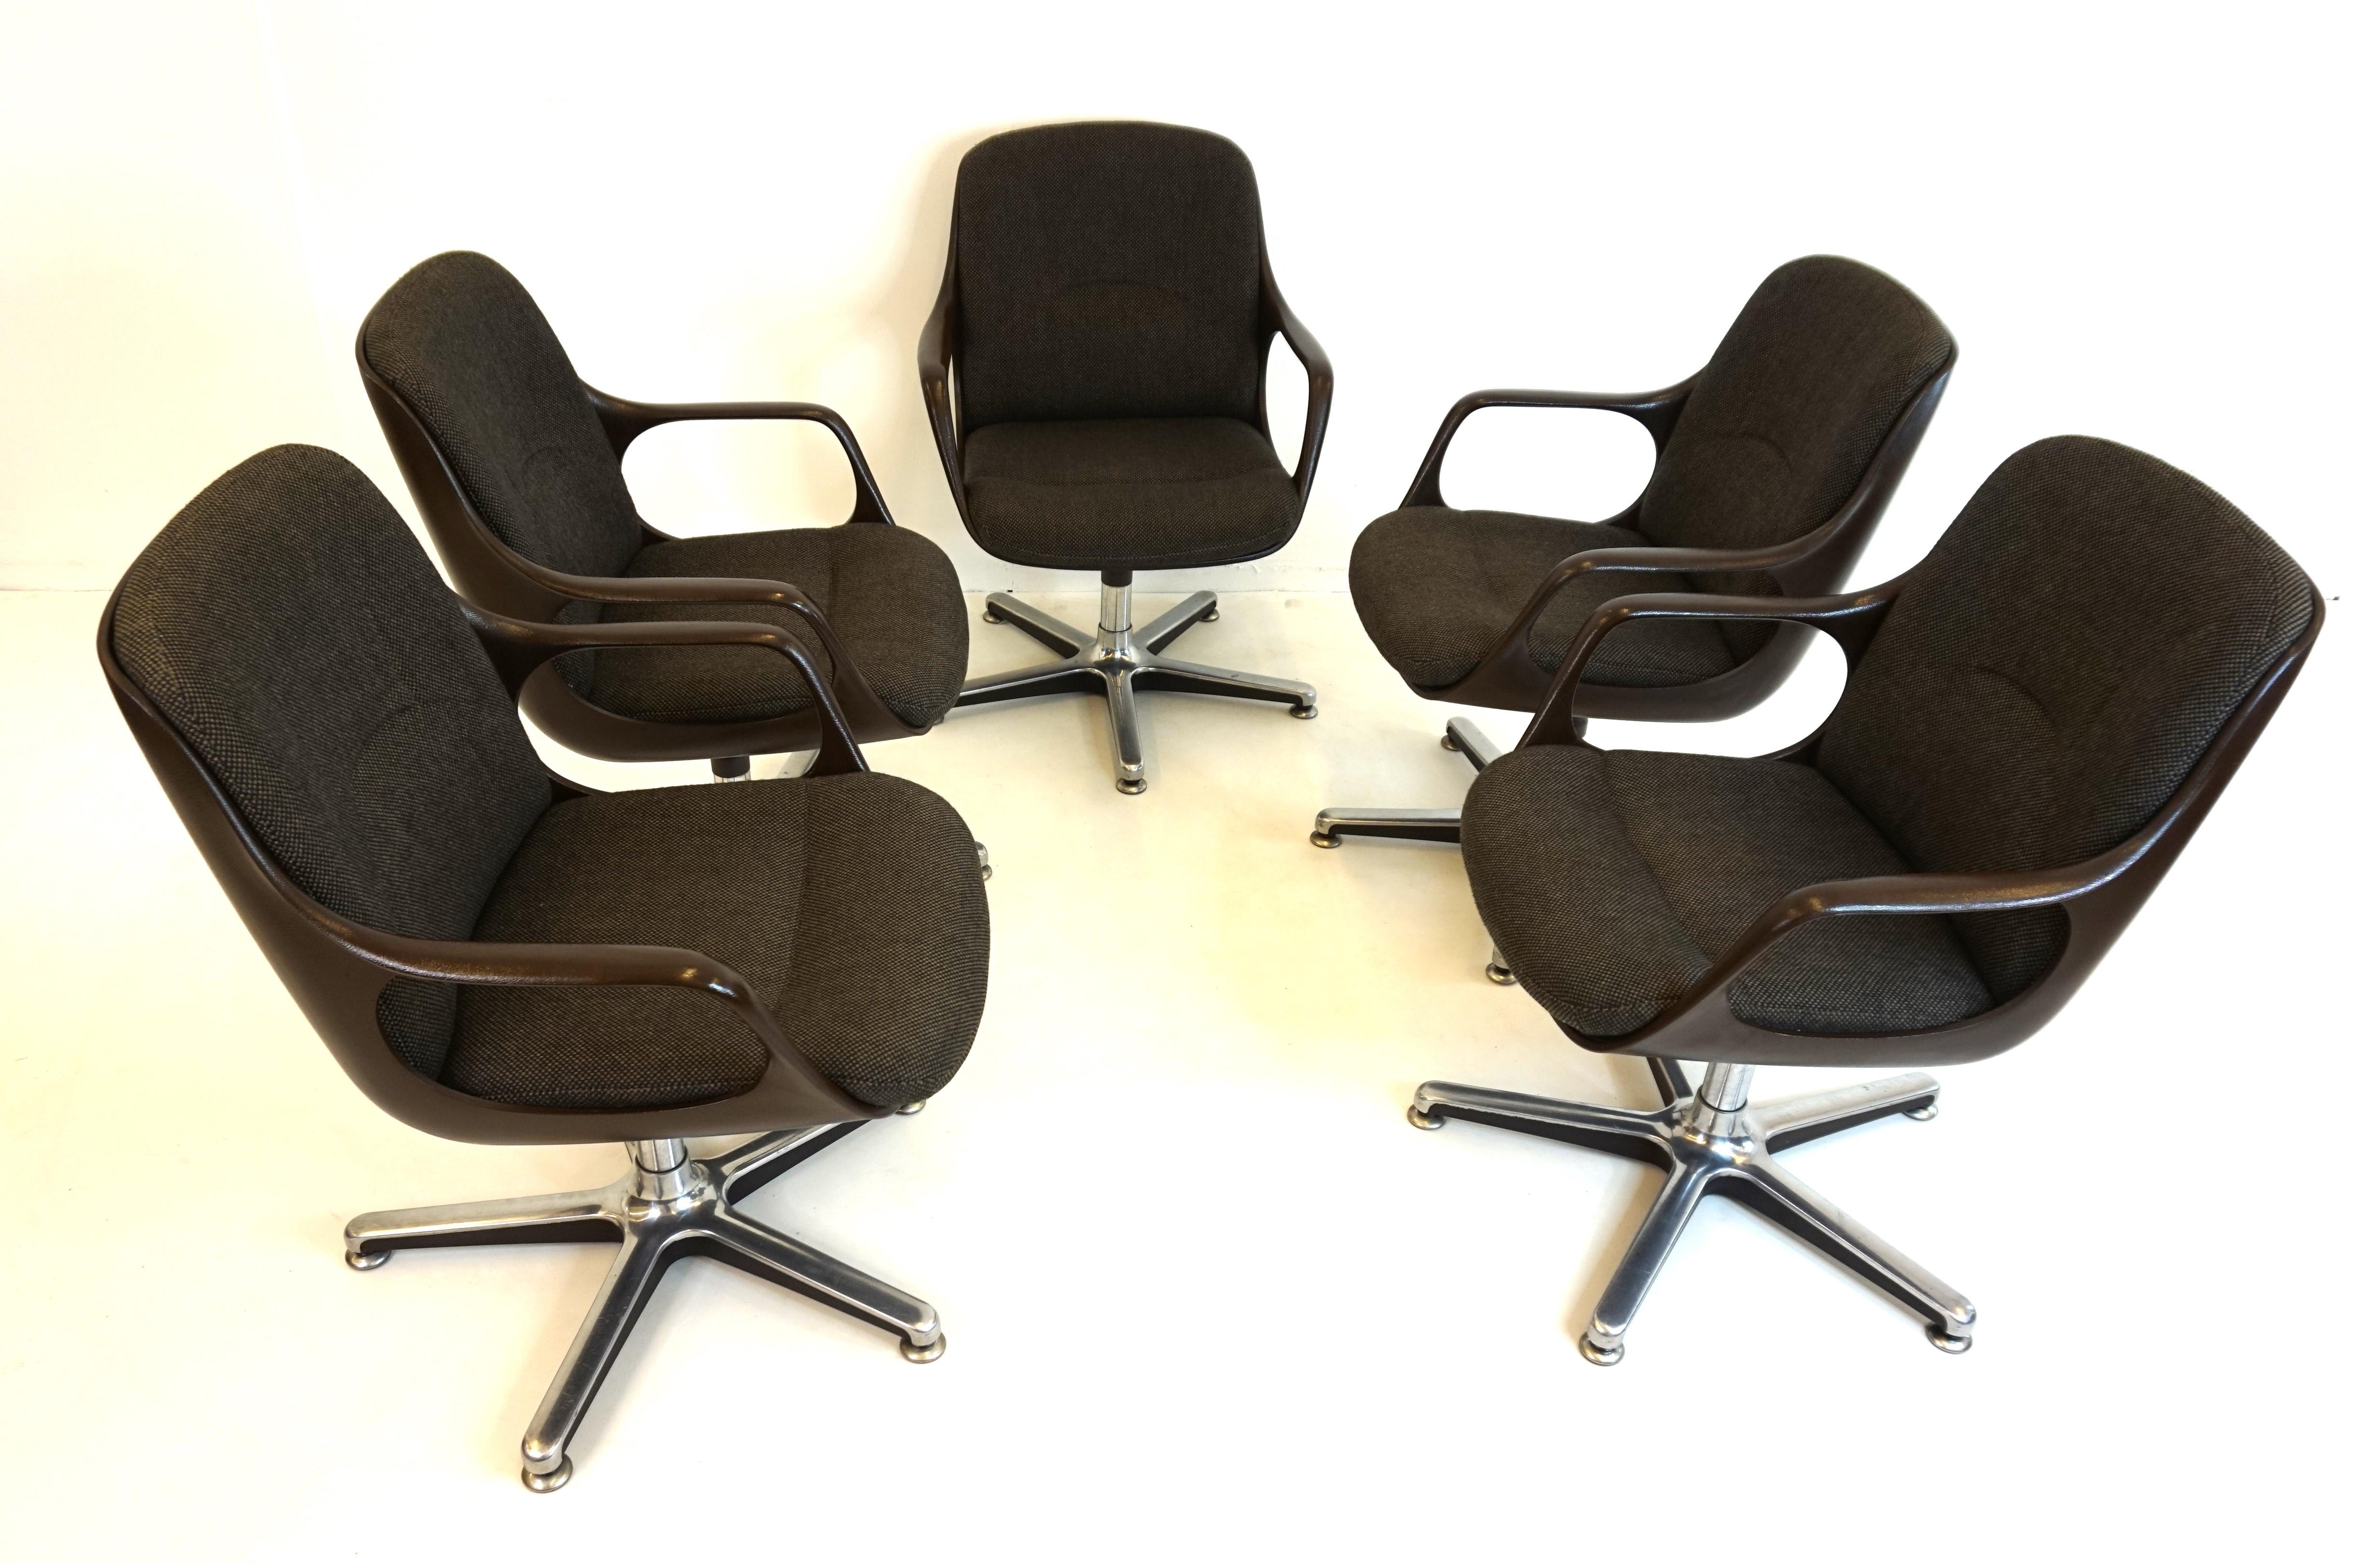 Chromcraft Set of 5 Space Age Office/Dining Room Chairs 13